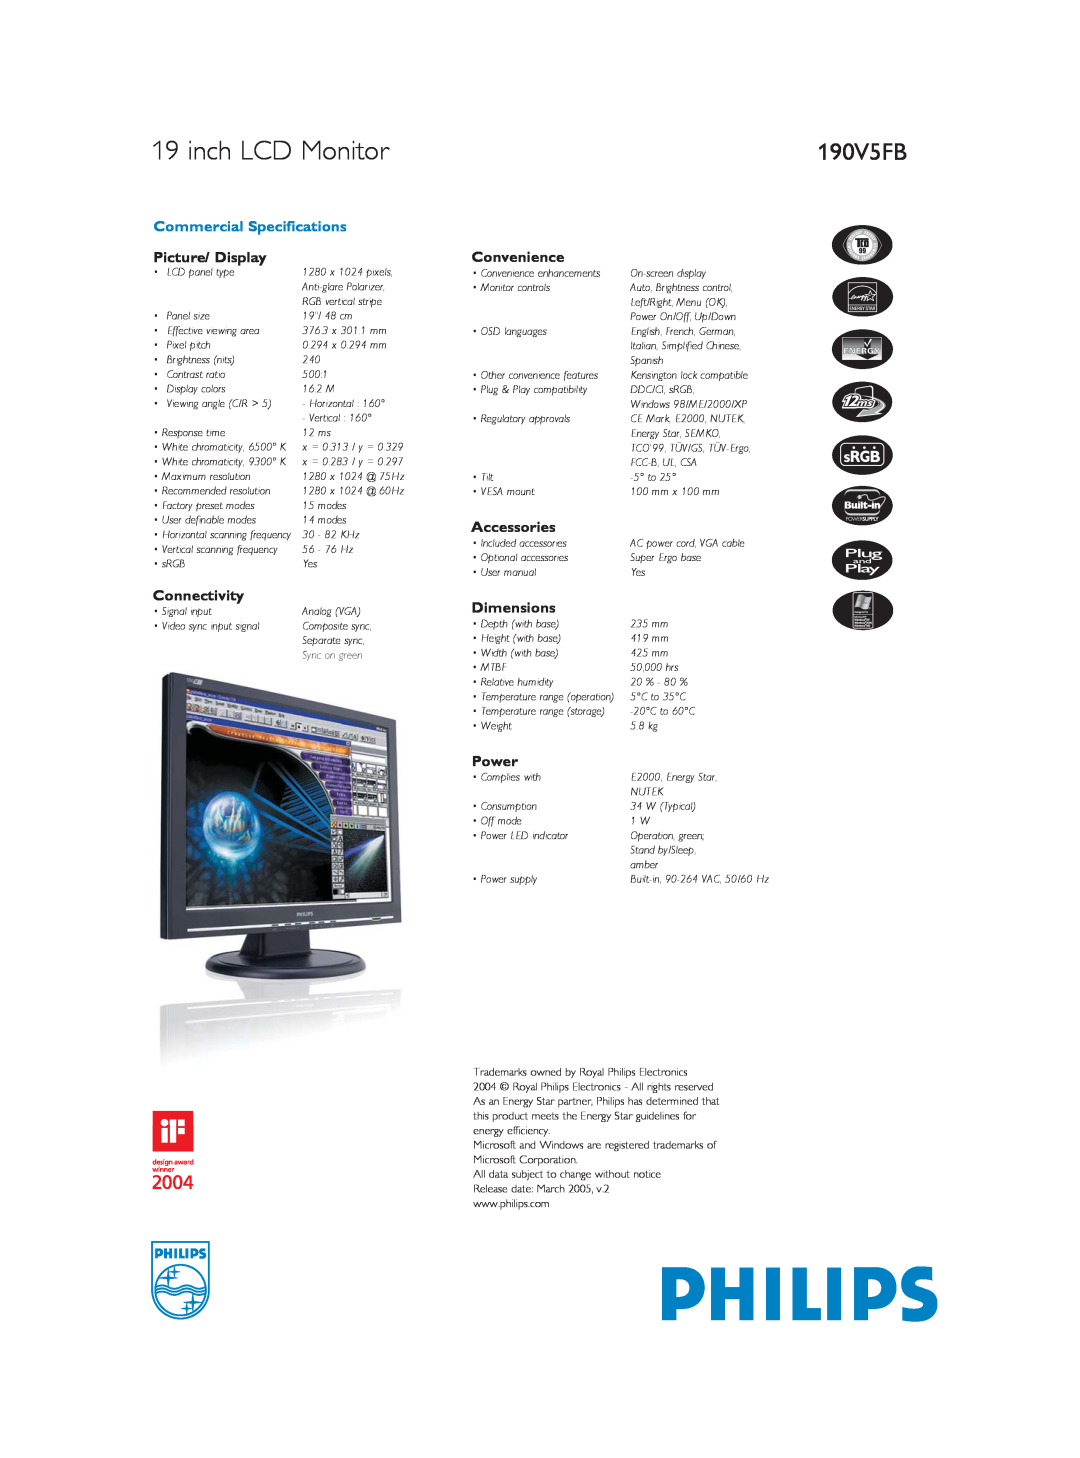 Philips 190V5FB dimensions inch LCD Monitor, Commercial Specifications, Picture/ Display, Connectivity, Convenience, Power 